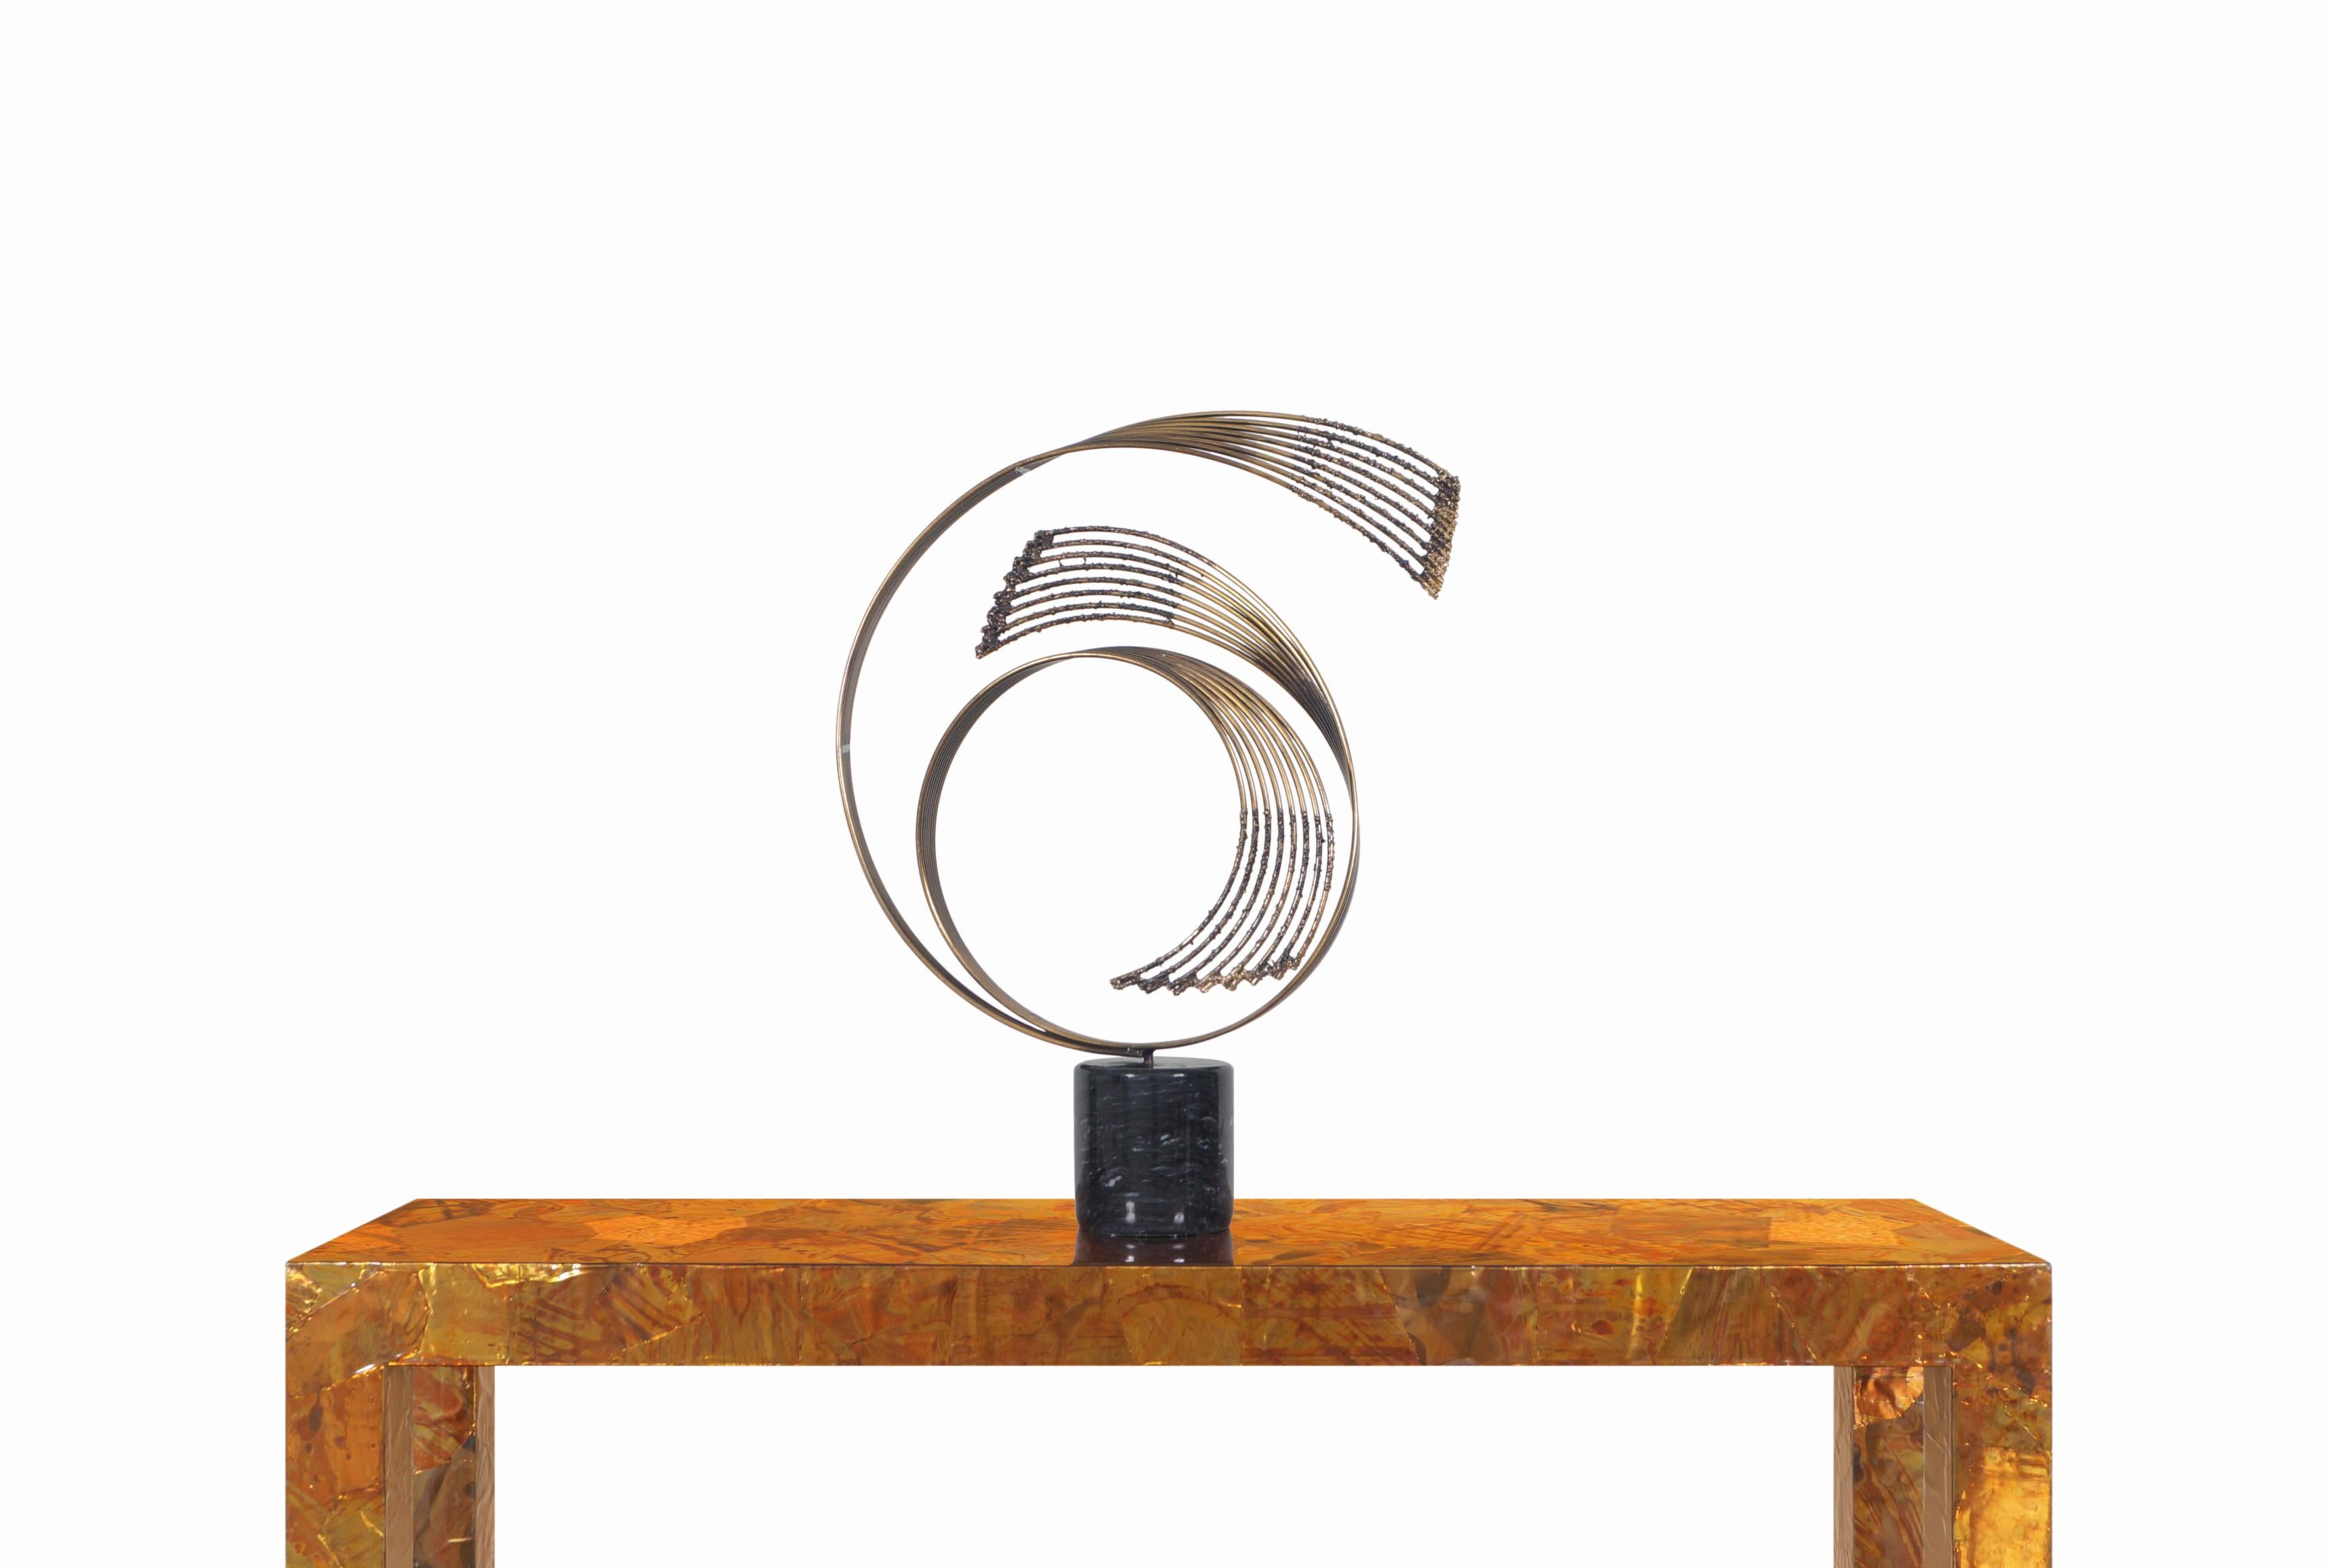 Stunning vintage brass “Windswept” sculpture designed by Curtis Jere and manufactured in the United States. At the top, we have an elegant representation of abstract art where its circular composition made up of brass-plated metal rods stands out.